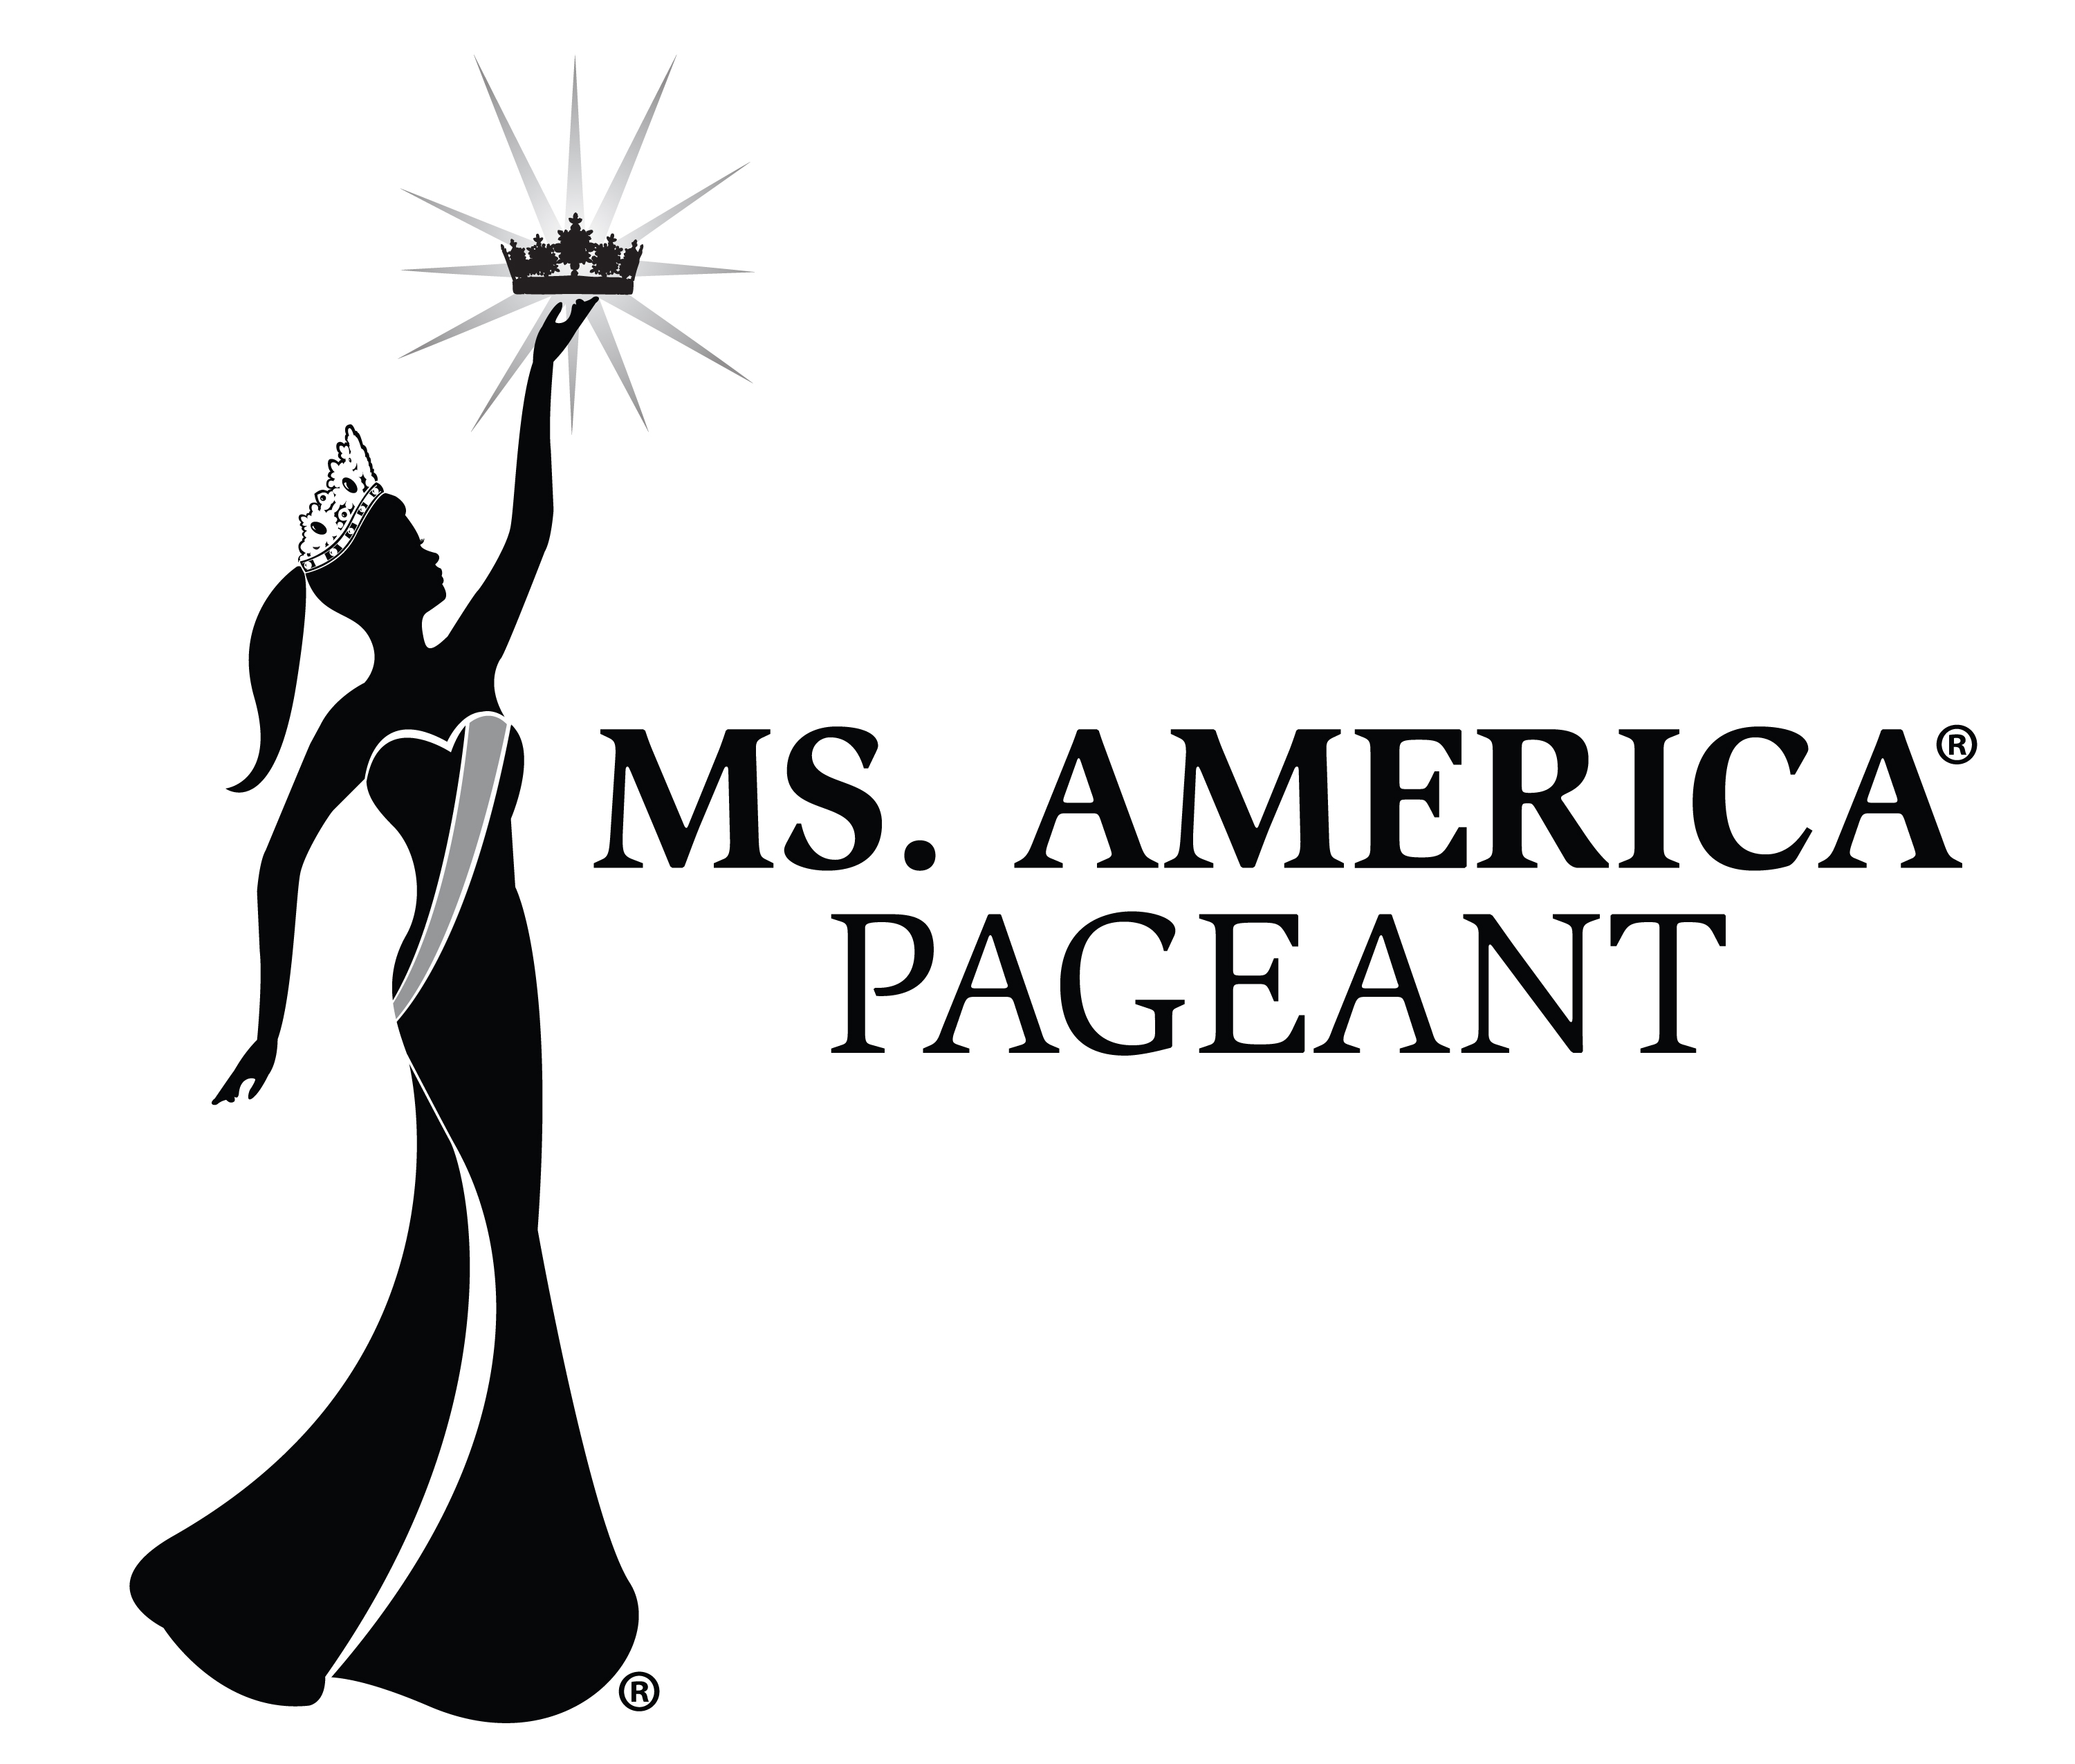 The official logo of the Ms. America Pageant - no one is permitted to use it without permissions from the Ms. America Pageant.